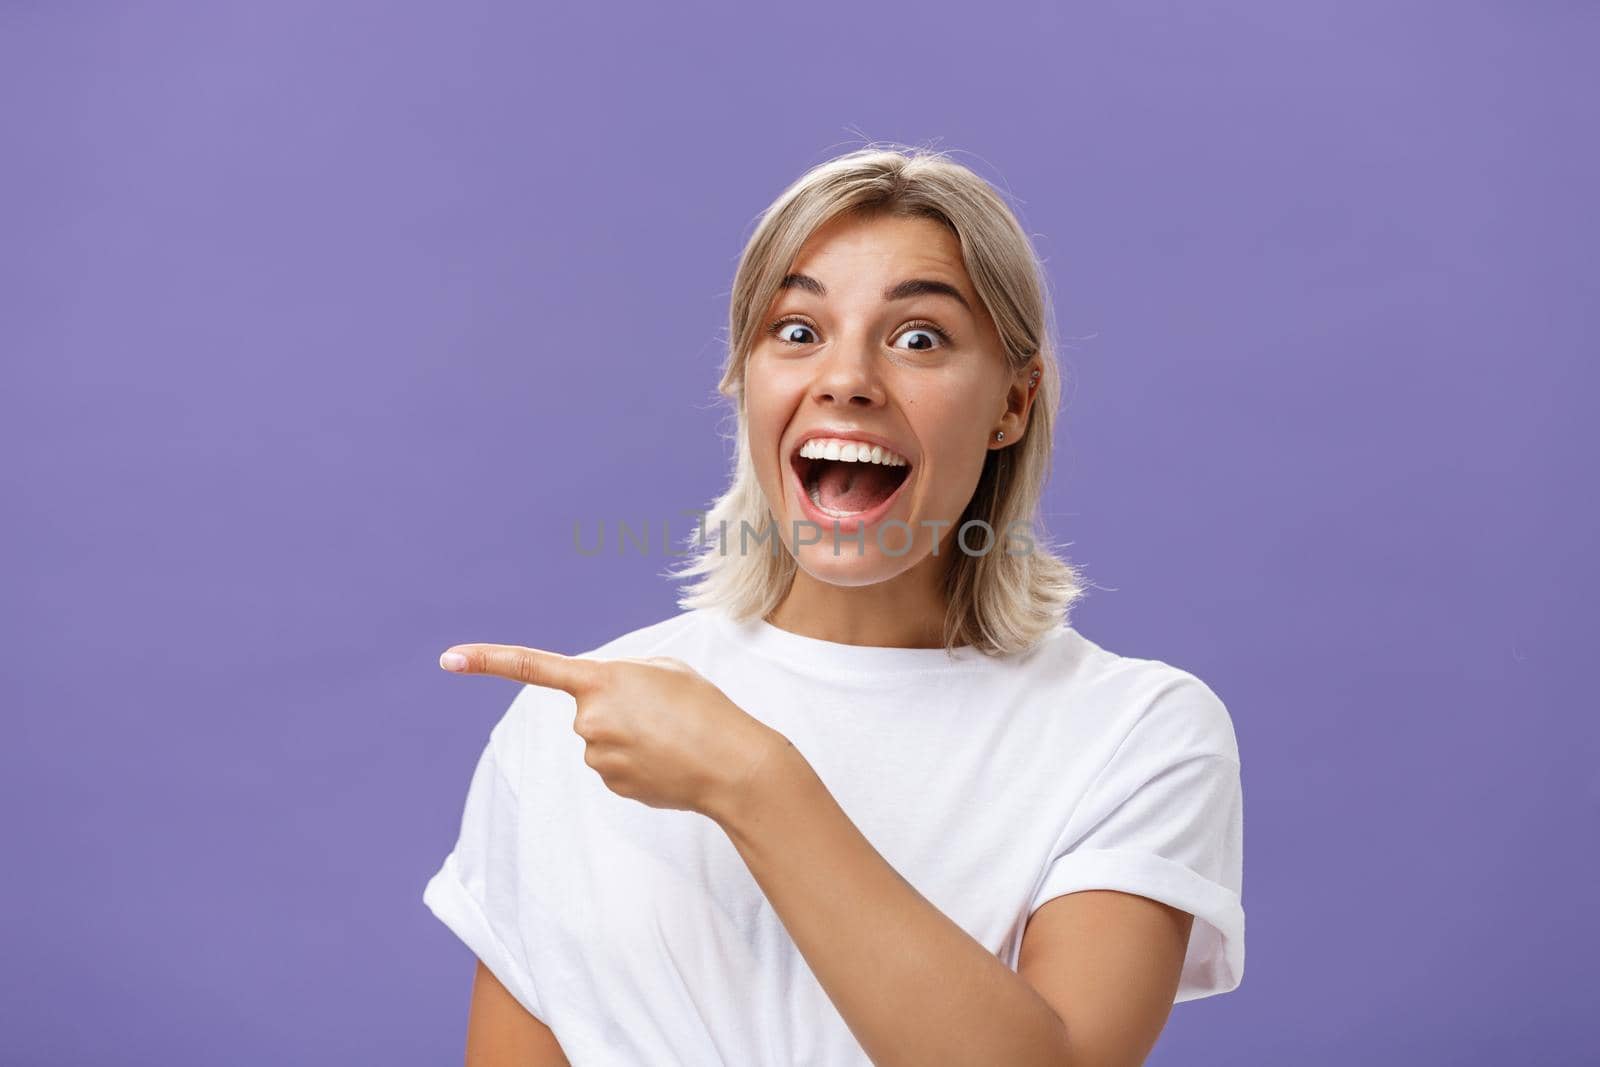 Waist-up shot of joyful thrilled attractive and emotive young blonde female with tanned skin in white casual t-shirt smiling and laughing happily pointing left with excitement over purple wall. Emotions concept